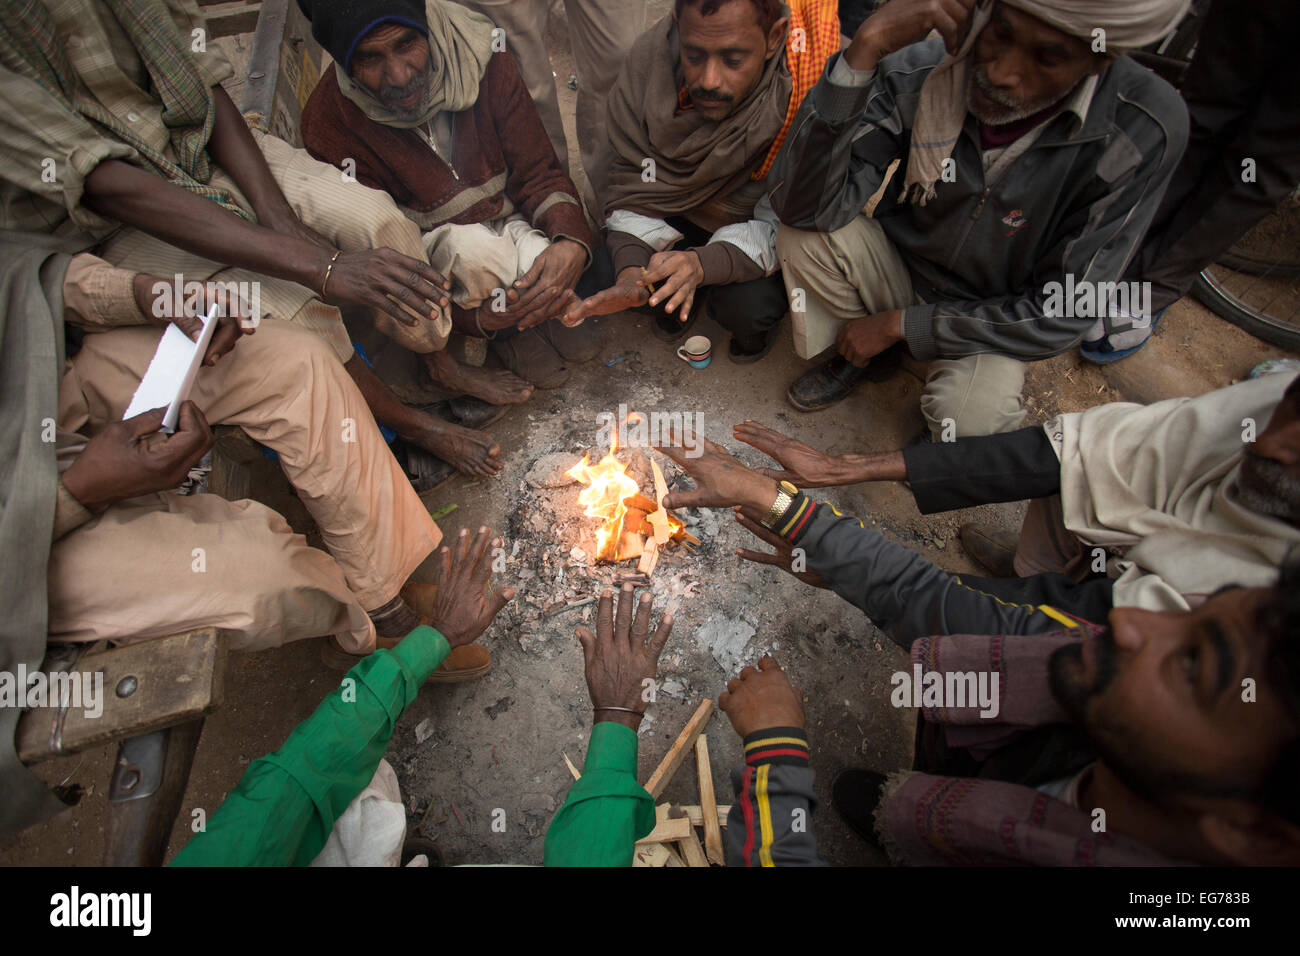 Men warm themselves by a fire in Old Delhi, India. Stock Photo